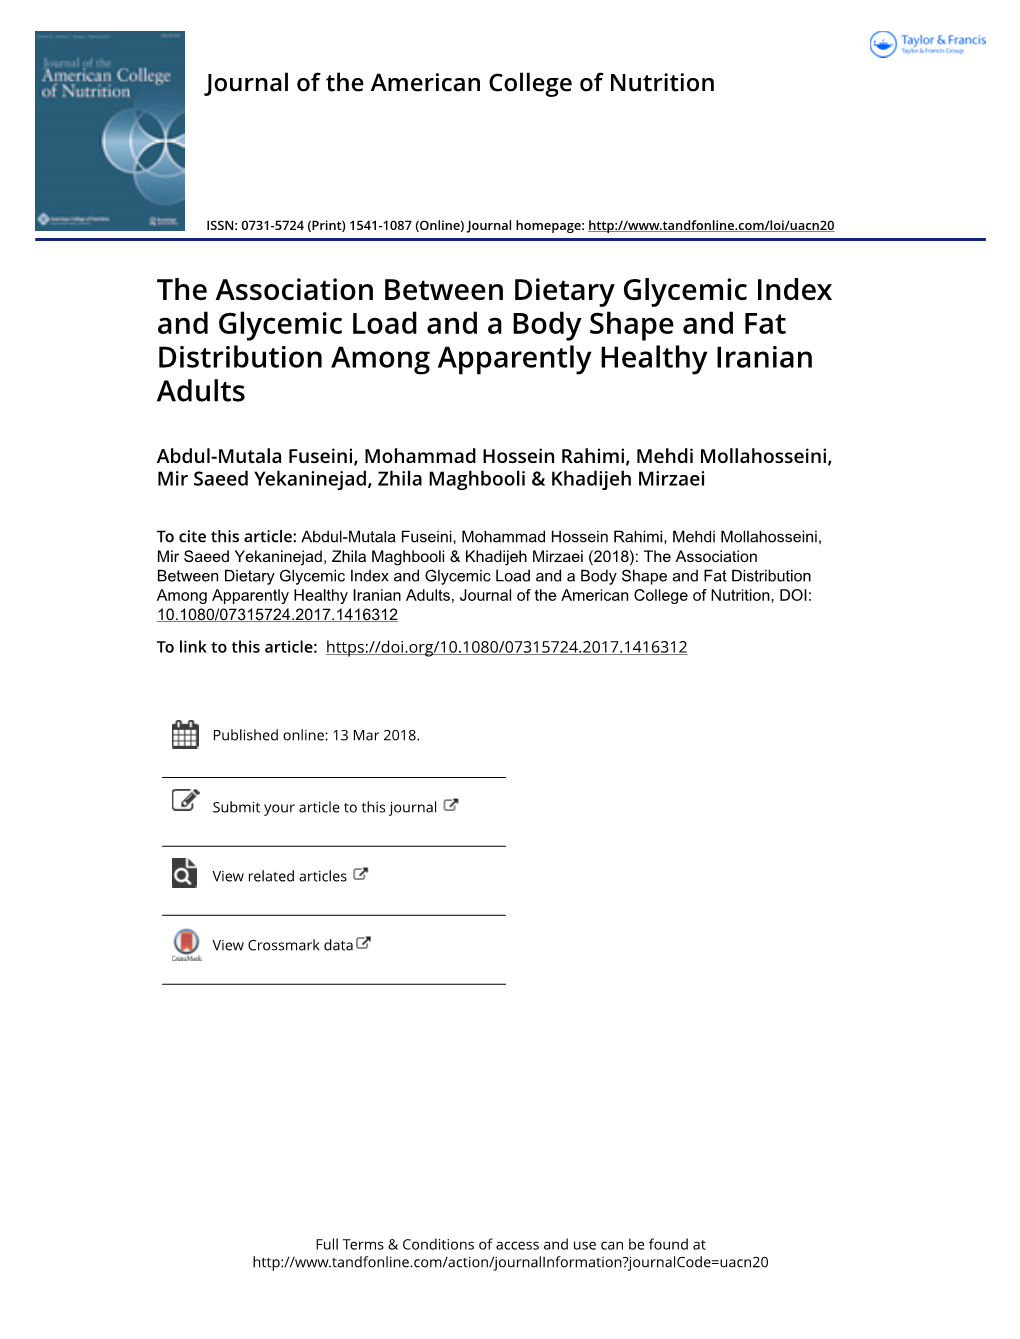 The Association Between Dietary Glycemic Index and Glycemic Load and a Body Shape and Fat Distribution Among Apparently Healthy Iranian Adults